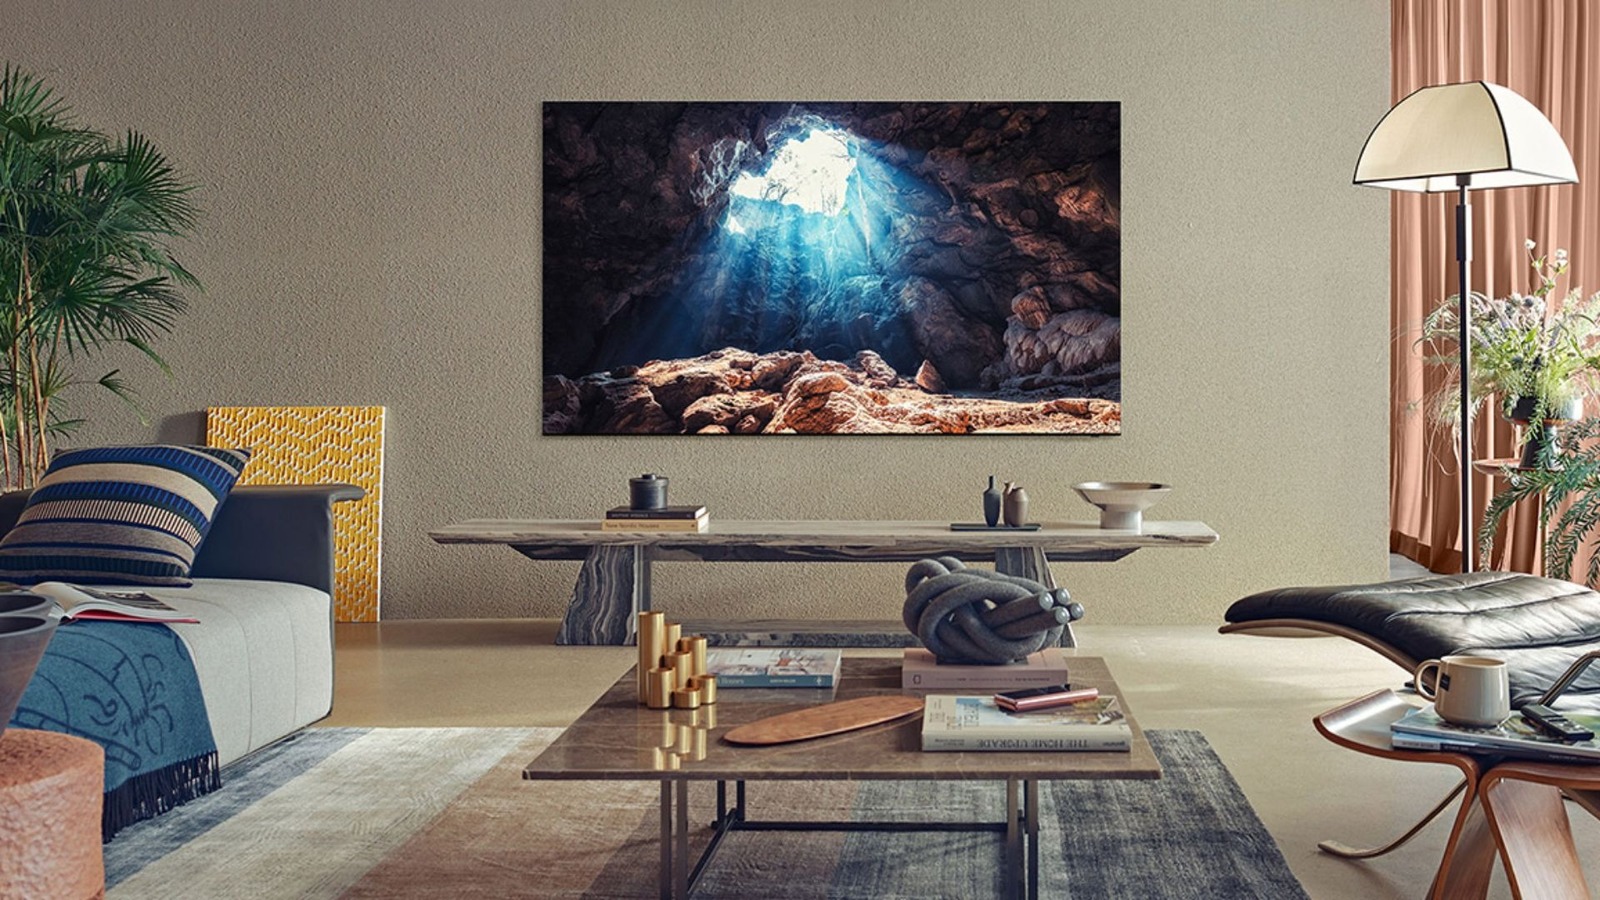 Does anyone actually want to buy an 8K TV?